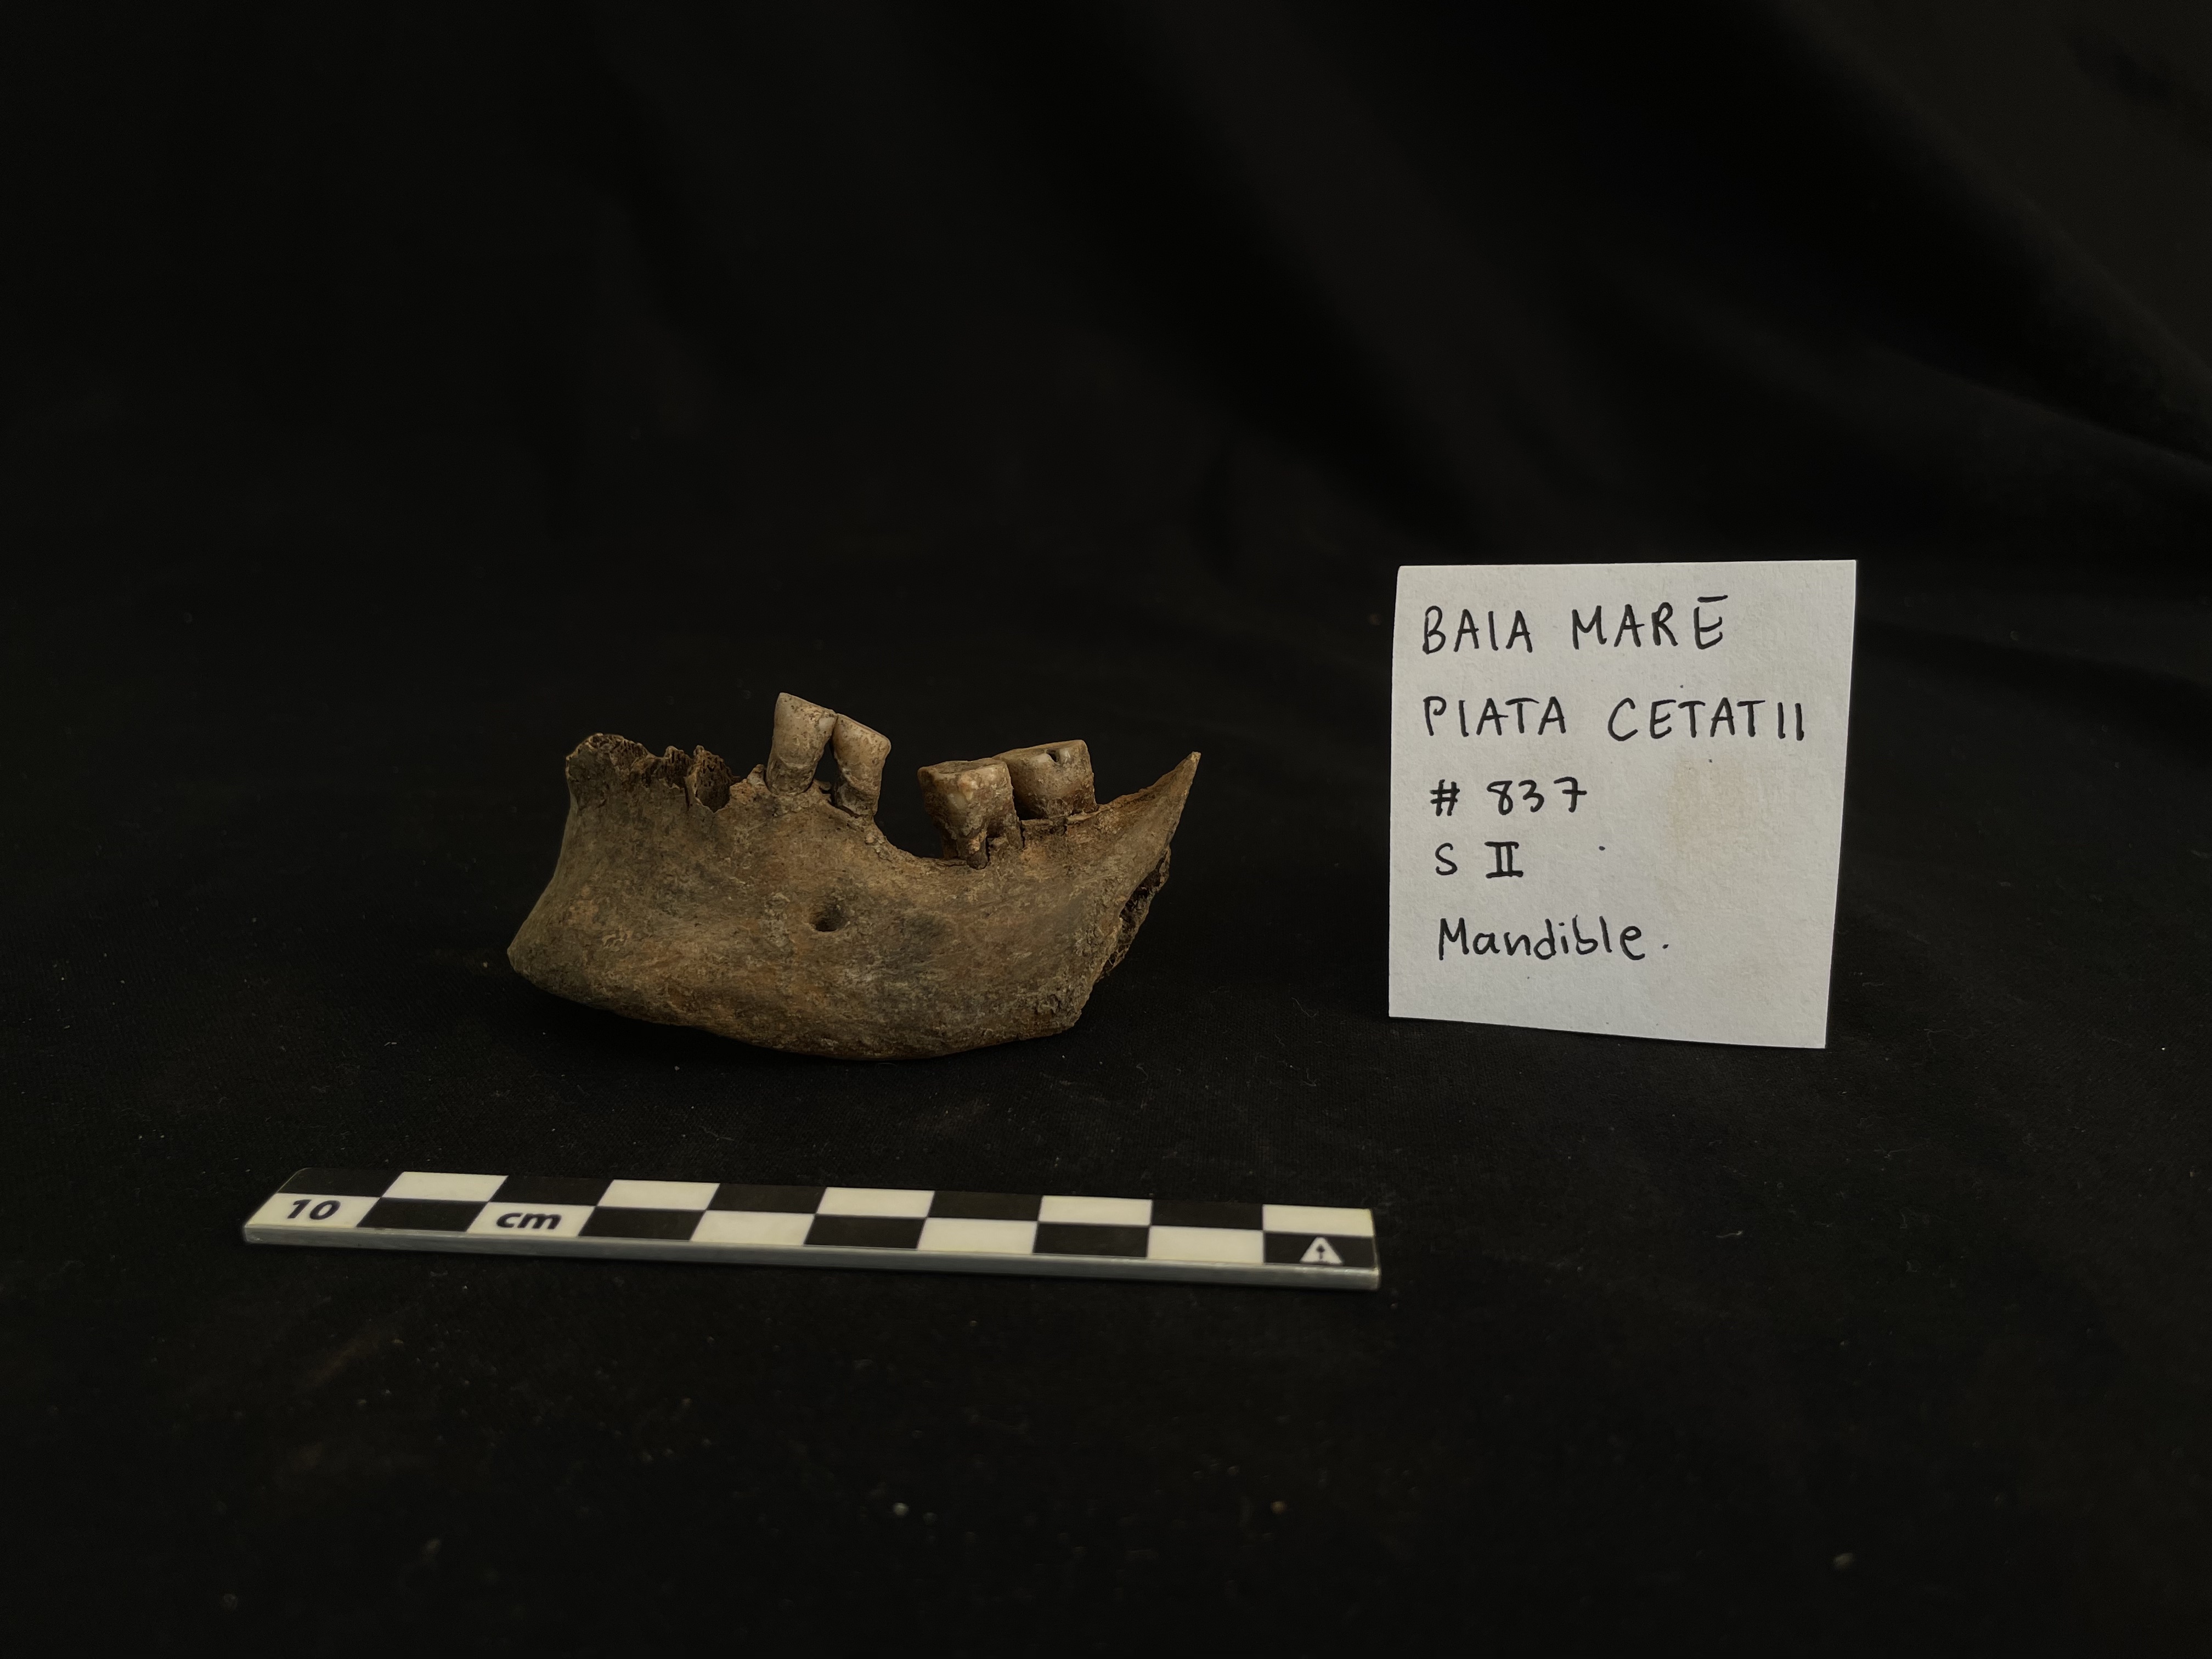 Lower jaw of an animal displayed with a professional black background and cm measuring tape.